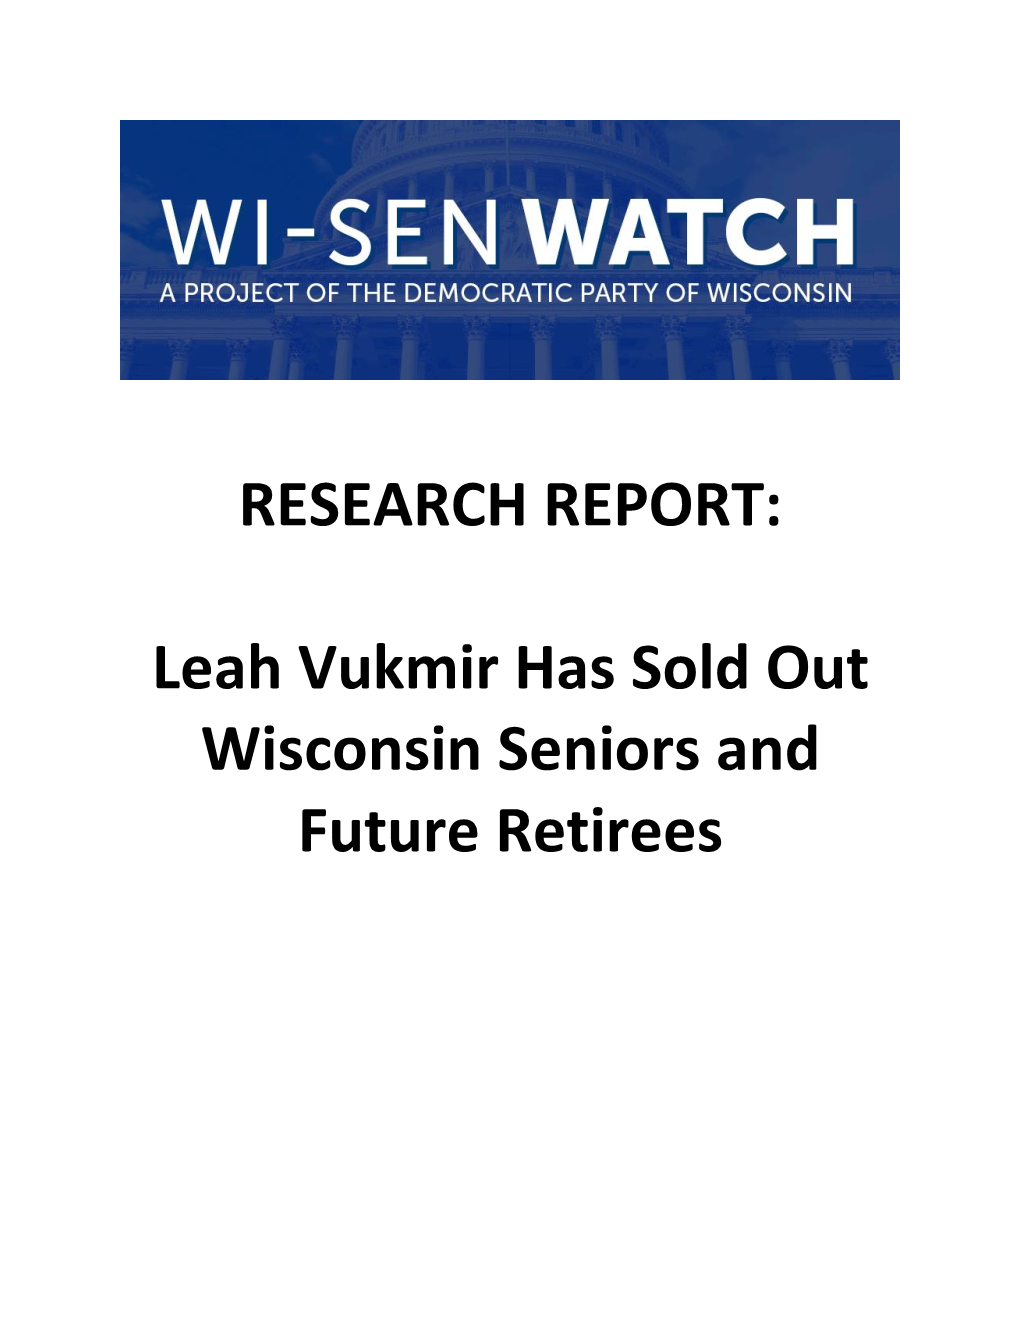 Leah Vukmir Has Sold out Wisconsin Seniors and Future Retirees